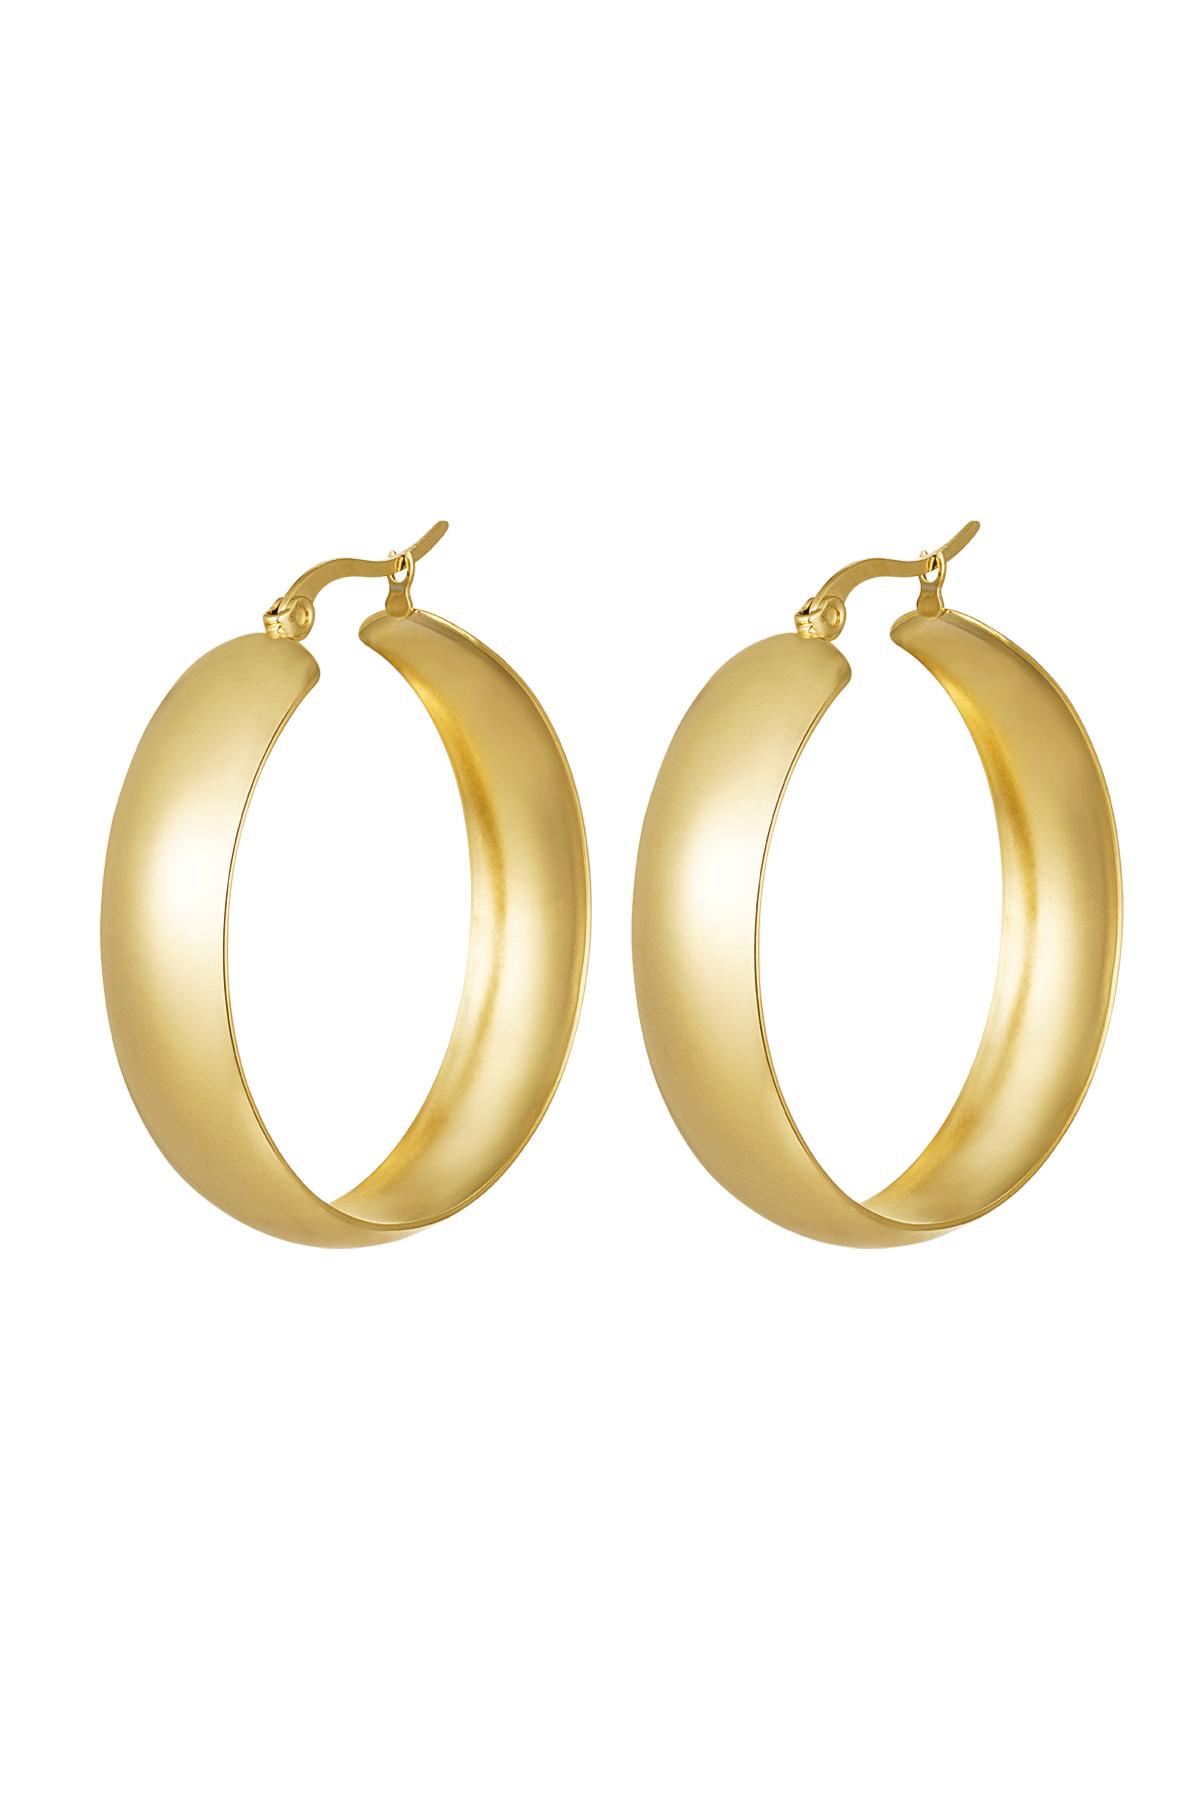 Earrings stainless steel chic Gold